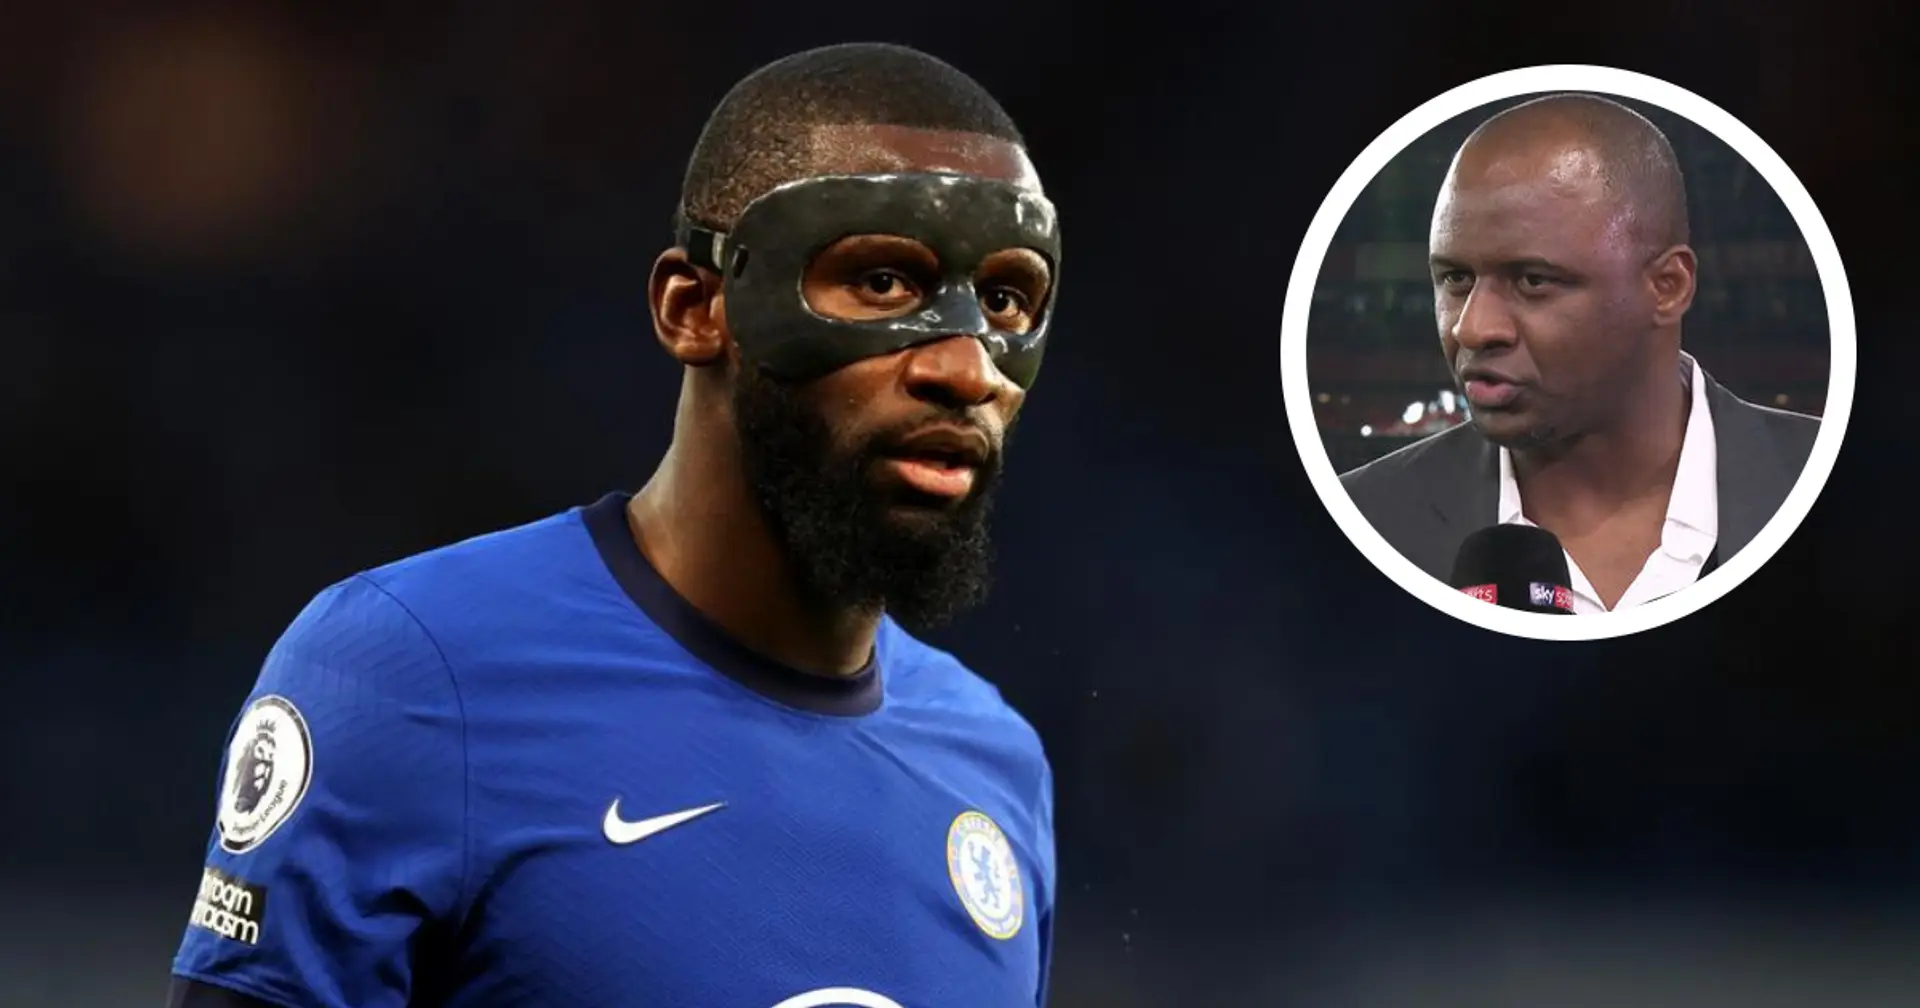 'He's not the smartest one': Ex-Arsenal man Patrick Vieria takes unnecessary dig at Rudiger